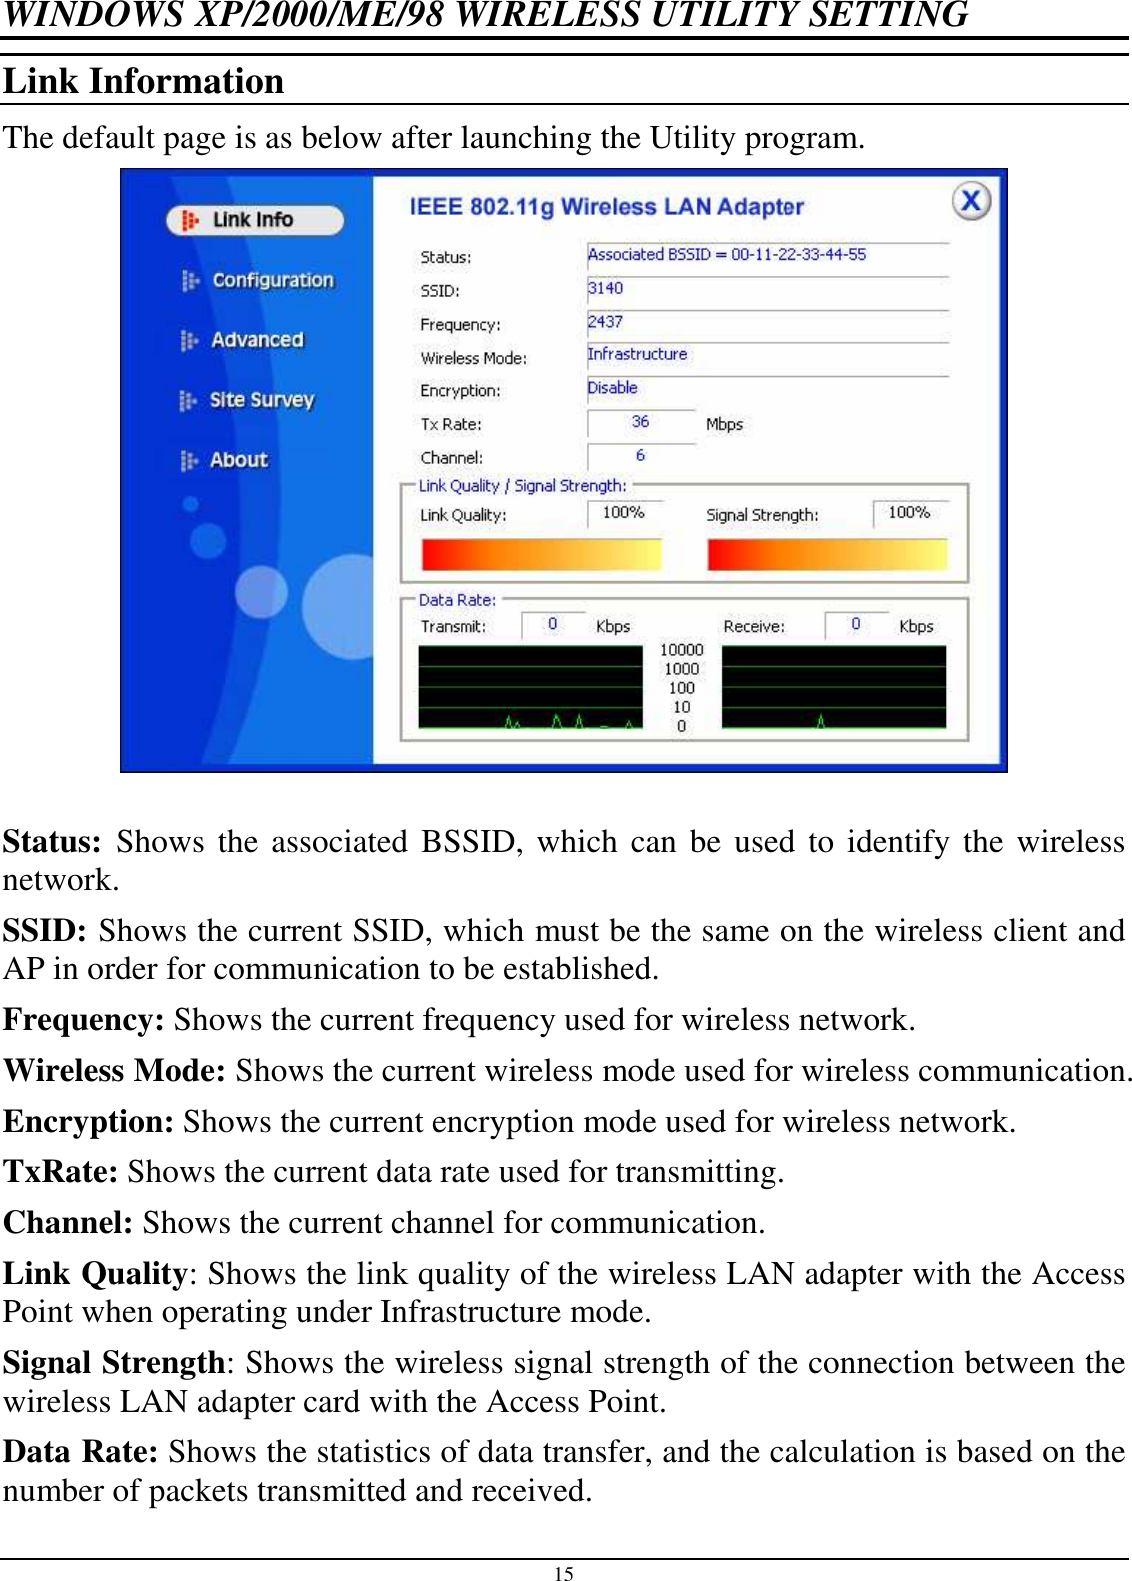 15 WINDOWS XP/2000/ME/98 WIRELESS UTILITY SETTING Link Information The default page is as below after launching the Utility program.   Status:  Shows the associated BSSID, which can be used to identify the wireless network. SSID: Shows the current SSID, which must be the same on the wireless client and AP in order for communication to be established. Frequency: Shows the current frequency used for wireless network. Wireless Mode: Shows the current wireless mode used for wireless communication. Encryption: Shows the current encryption mode used for wireless network. TxRate: Shows the current data rate used for transmitting. Channel: Shows the current channel for communication. Link Quality: Shows the link quality of the wireless LAN adapter with the Access Point when operating under Infrastructure mode. Signal Strength: Shows the wireless signal strength of the connection between the wireless LAN adapter card with the Access Point. Data Rate: Shows the statistics of data transfer, and the calculation is based on the number of packets transmitted and received. 